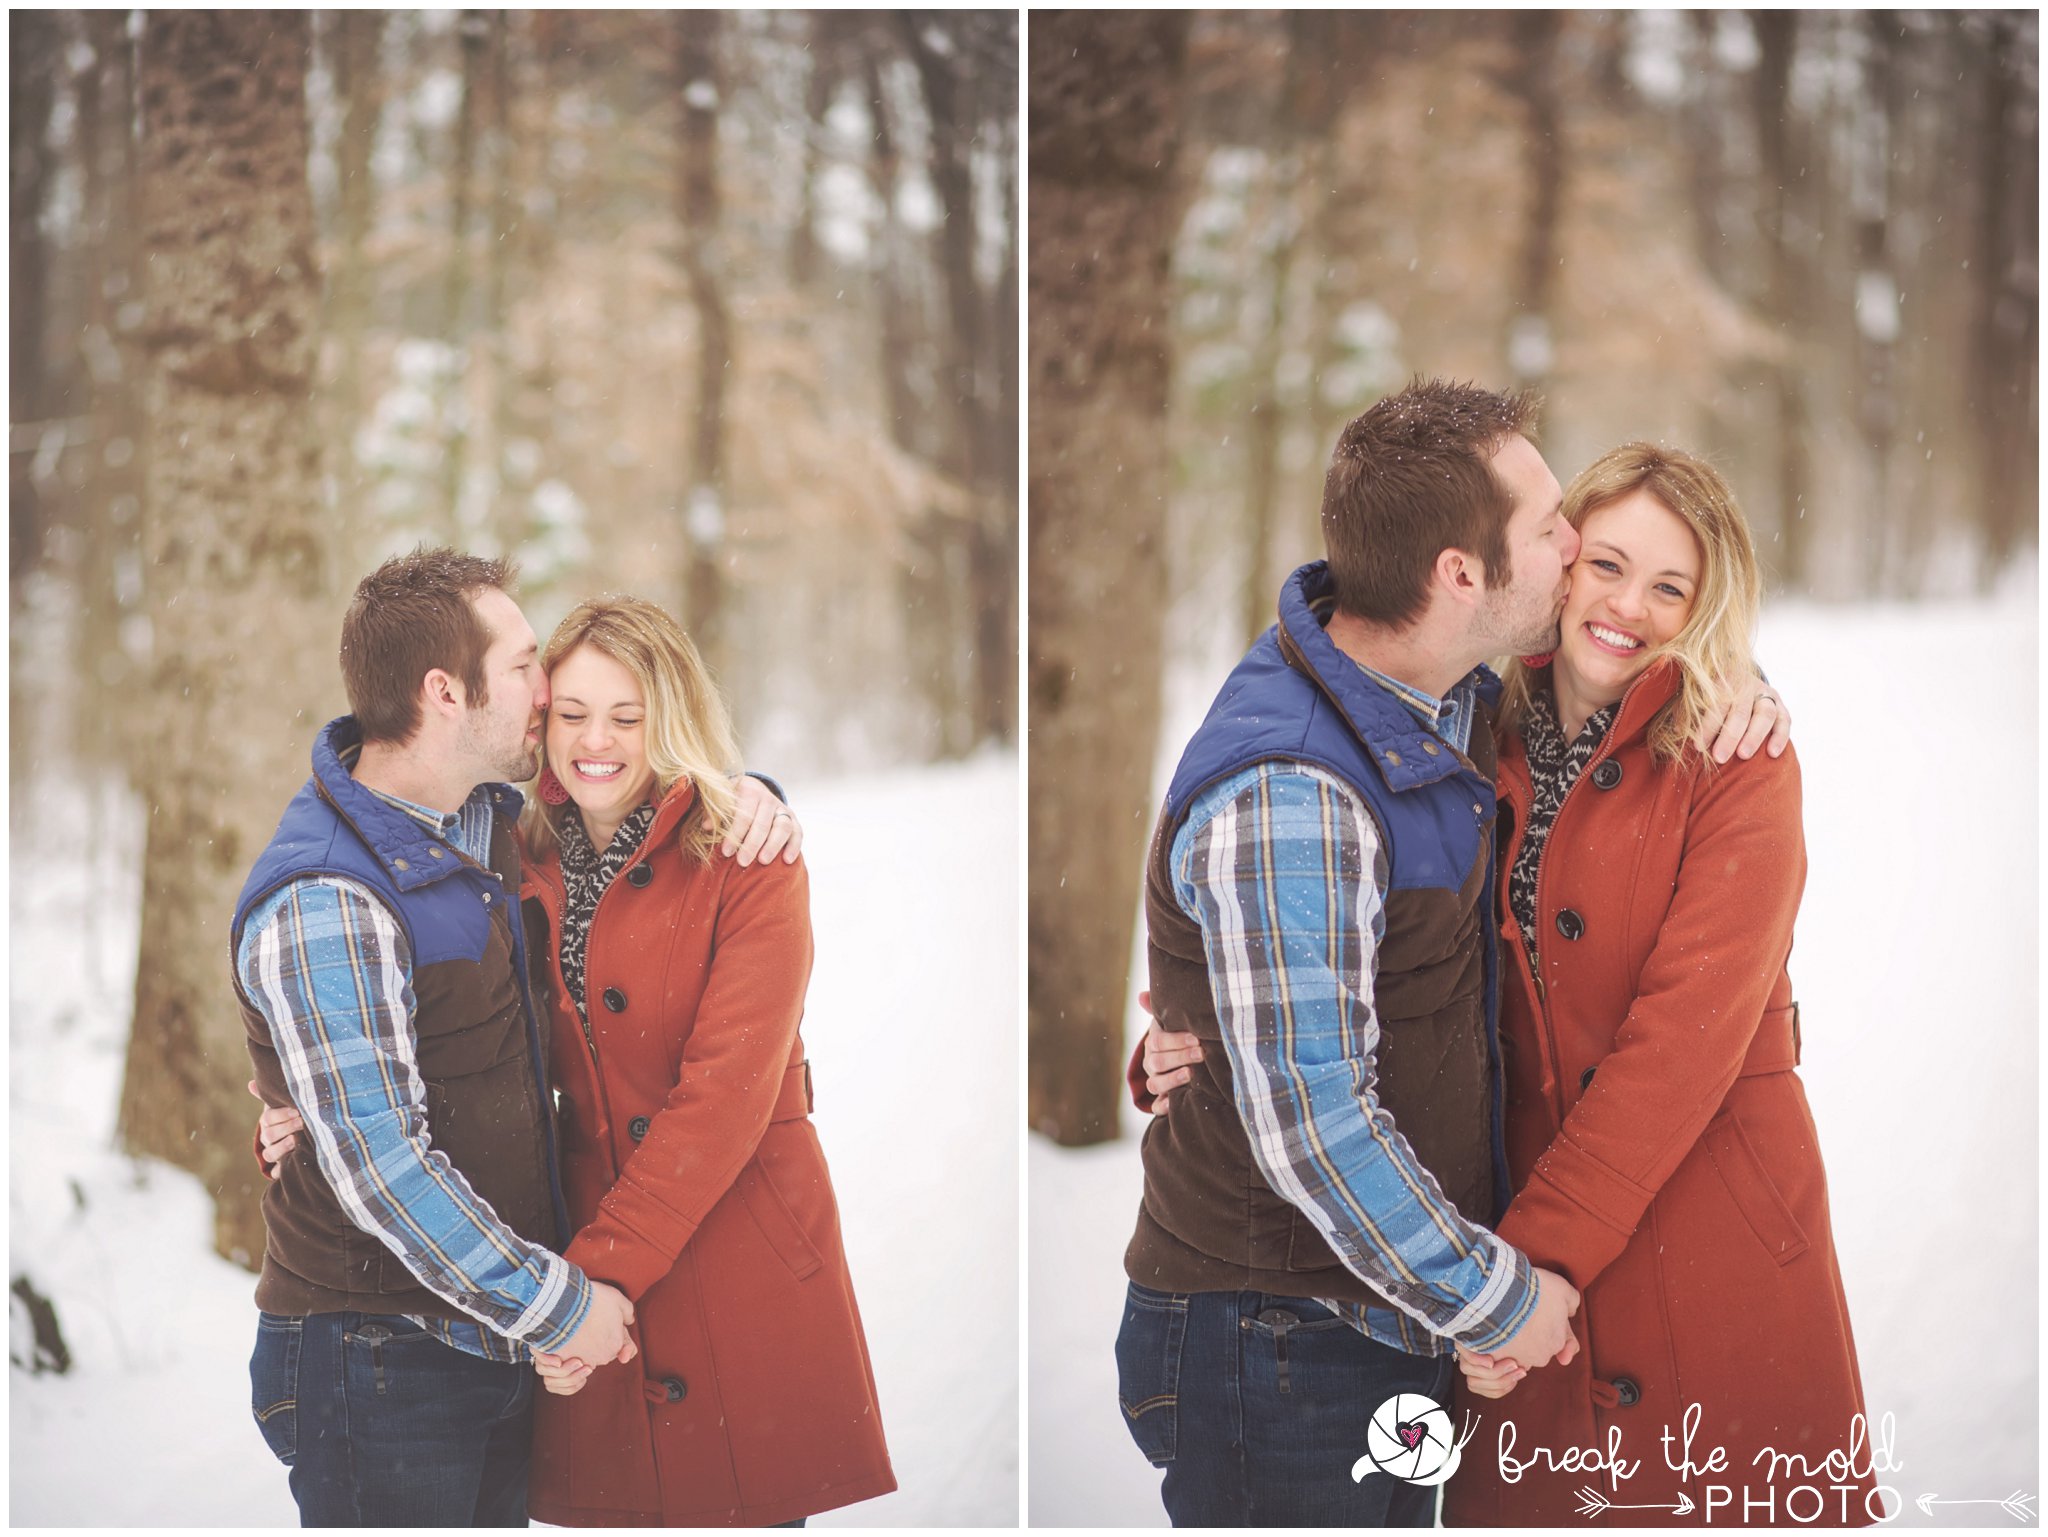 break-the-mold-photo-snowy-day-engagement-photos-knoxville-tn-tennessee-snow-day-pictures-winter-outdoor-unique-family_1498.jpg